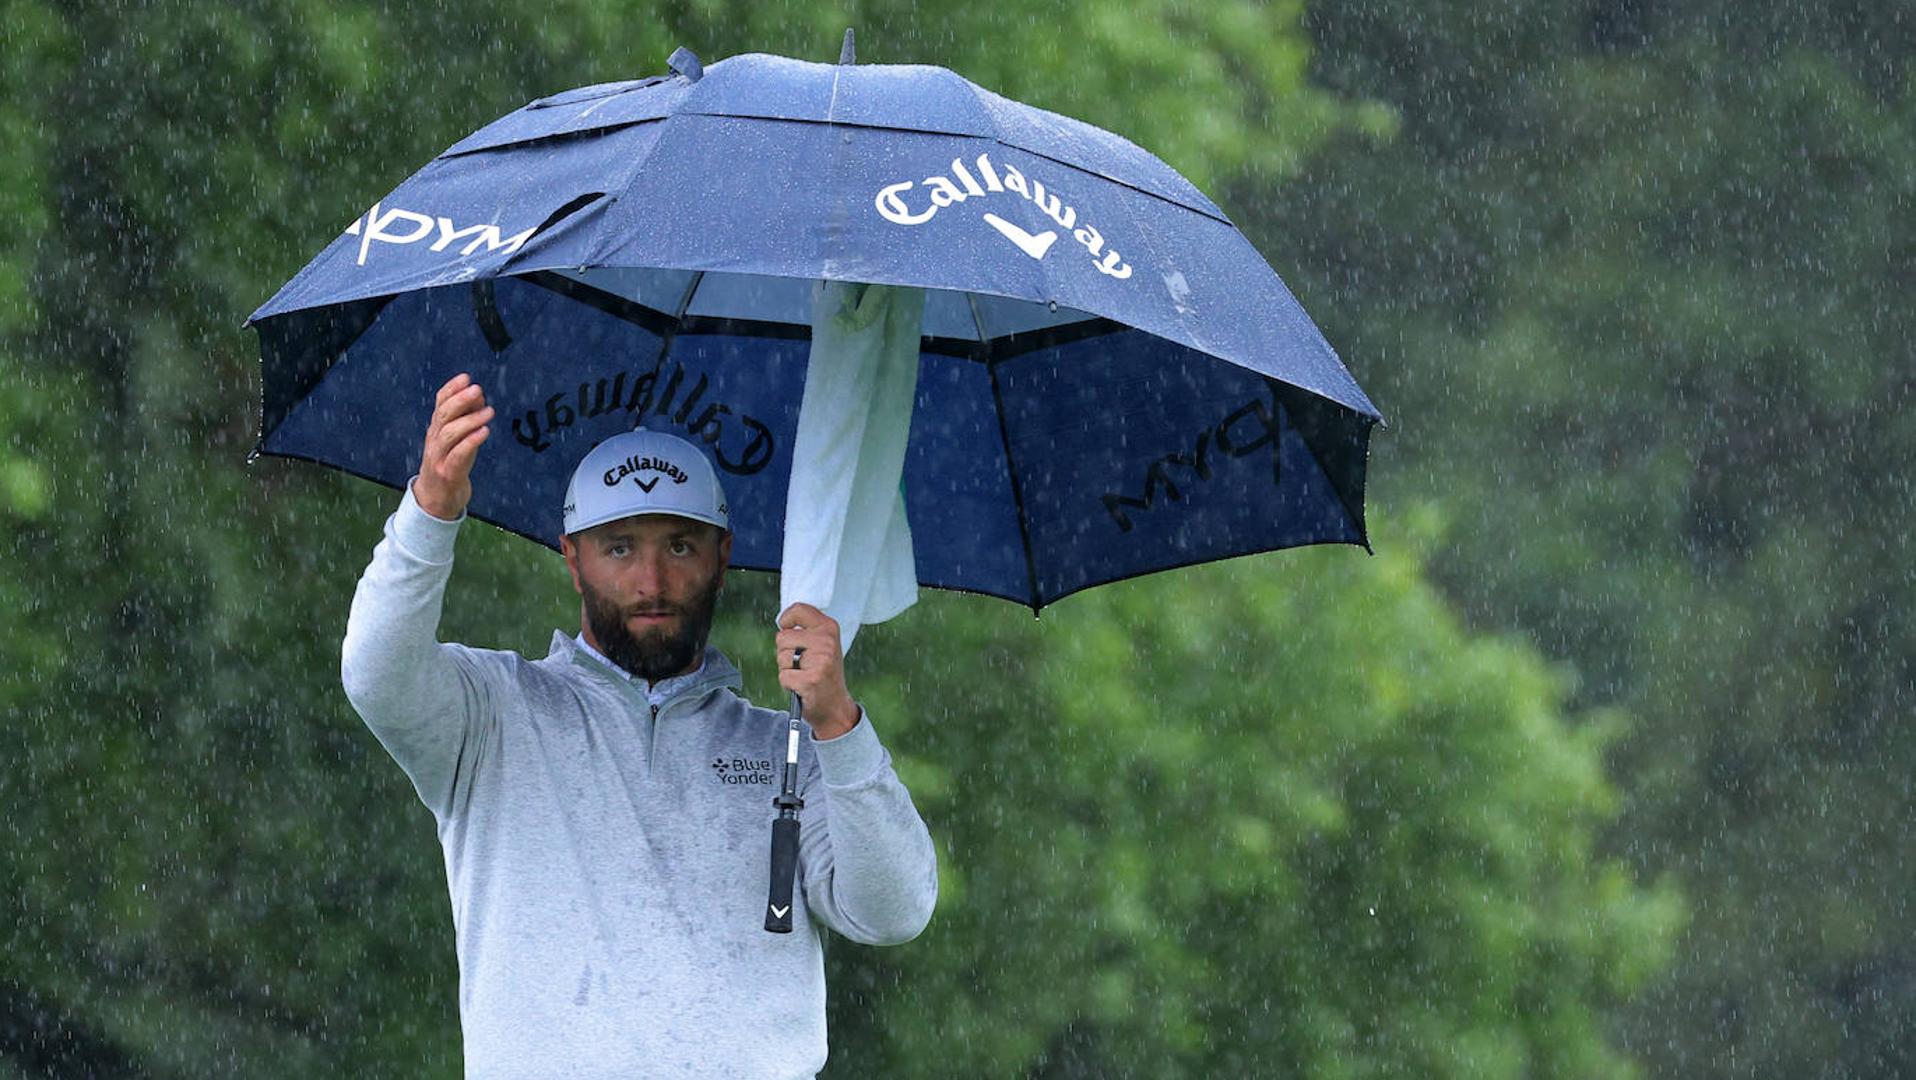 The rain forces the suspension of the day in Augusta with Rahm in the battle for victory